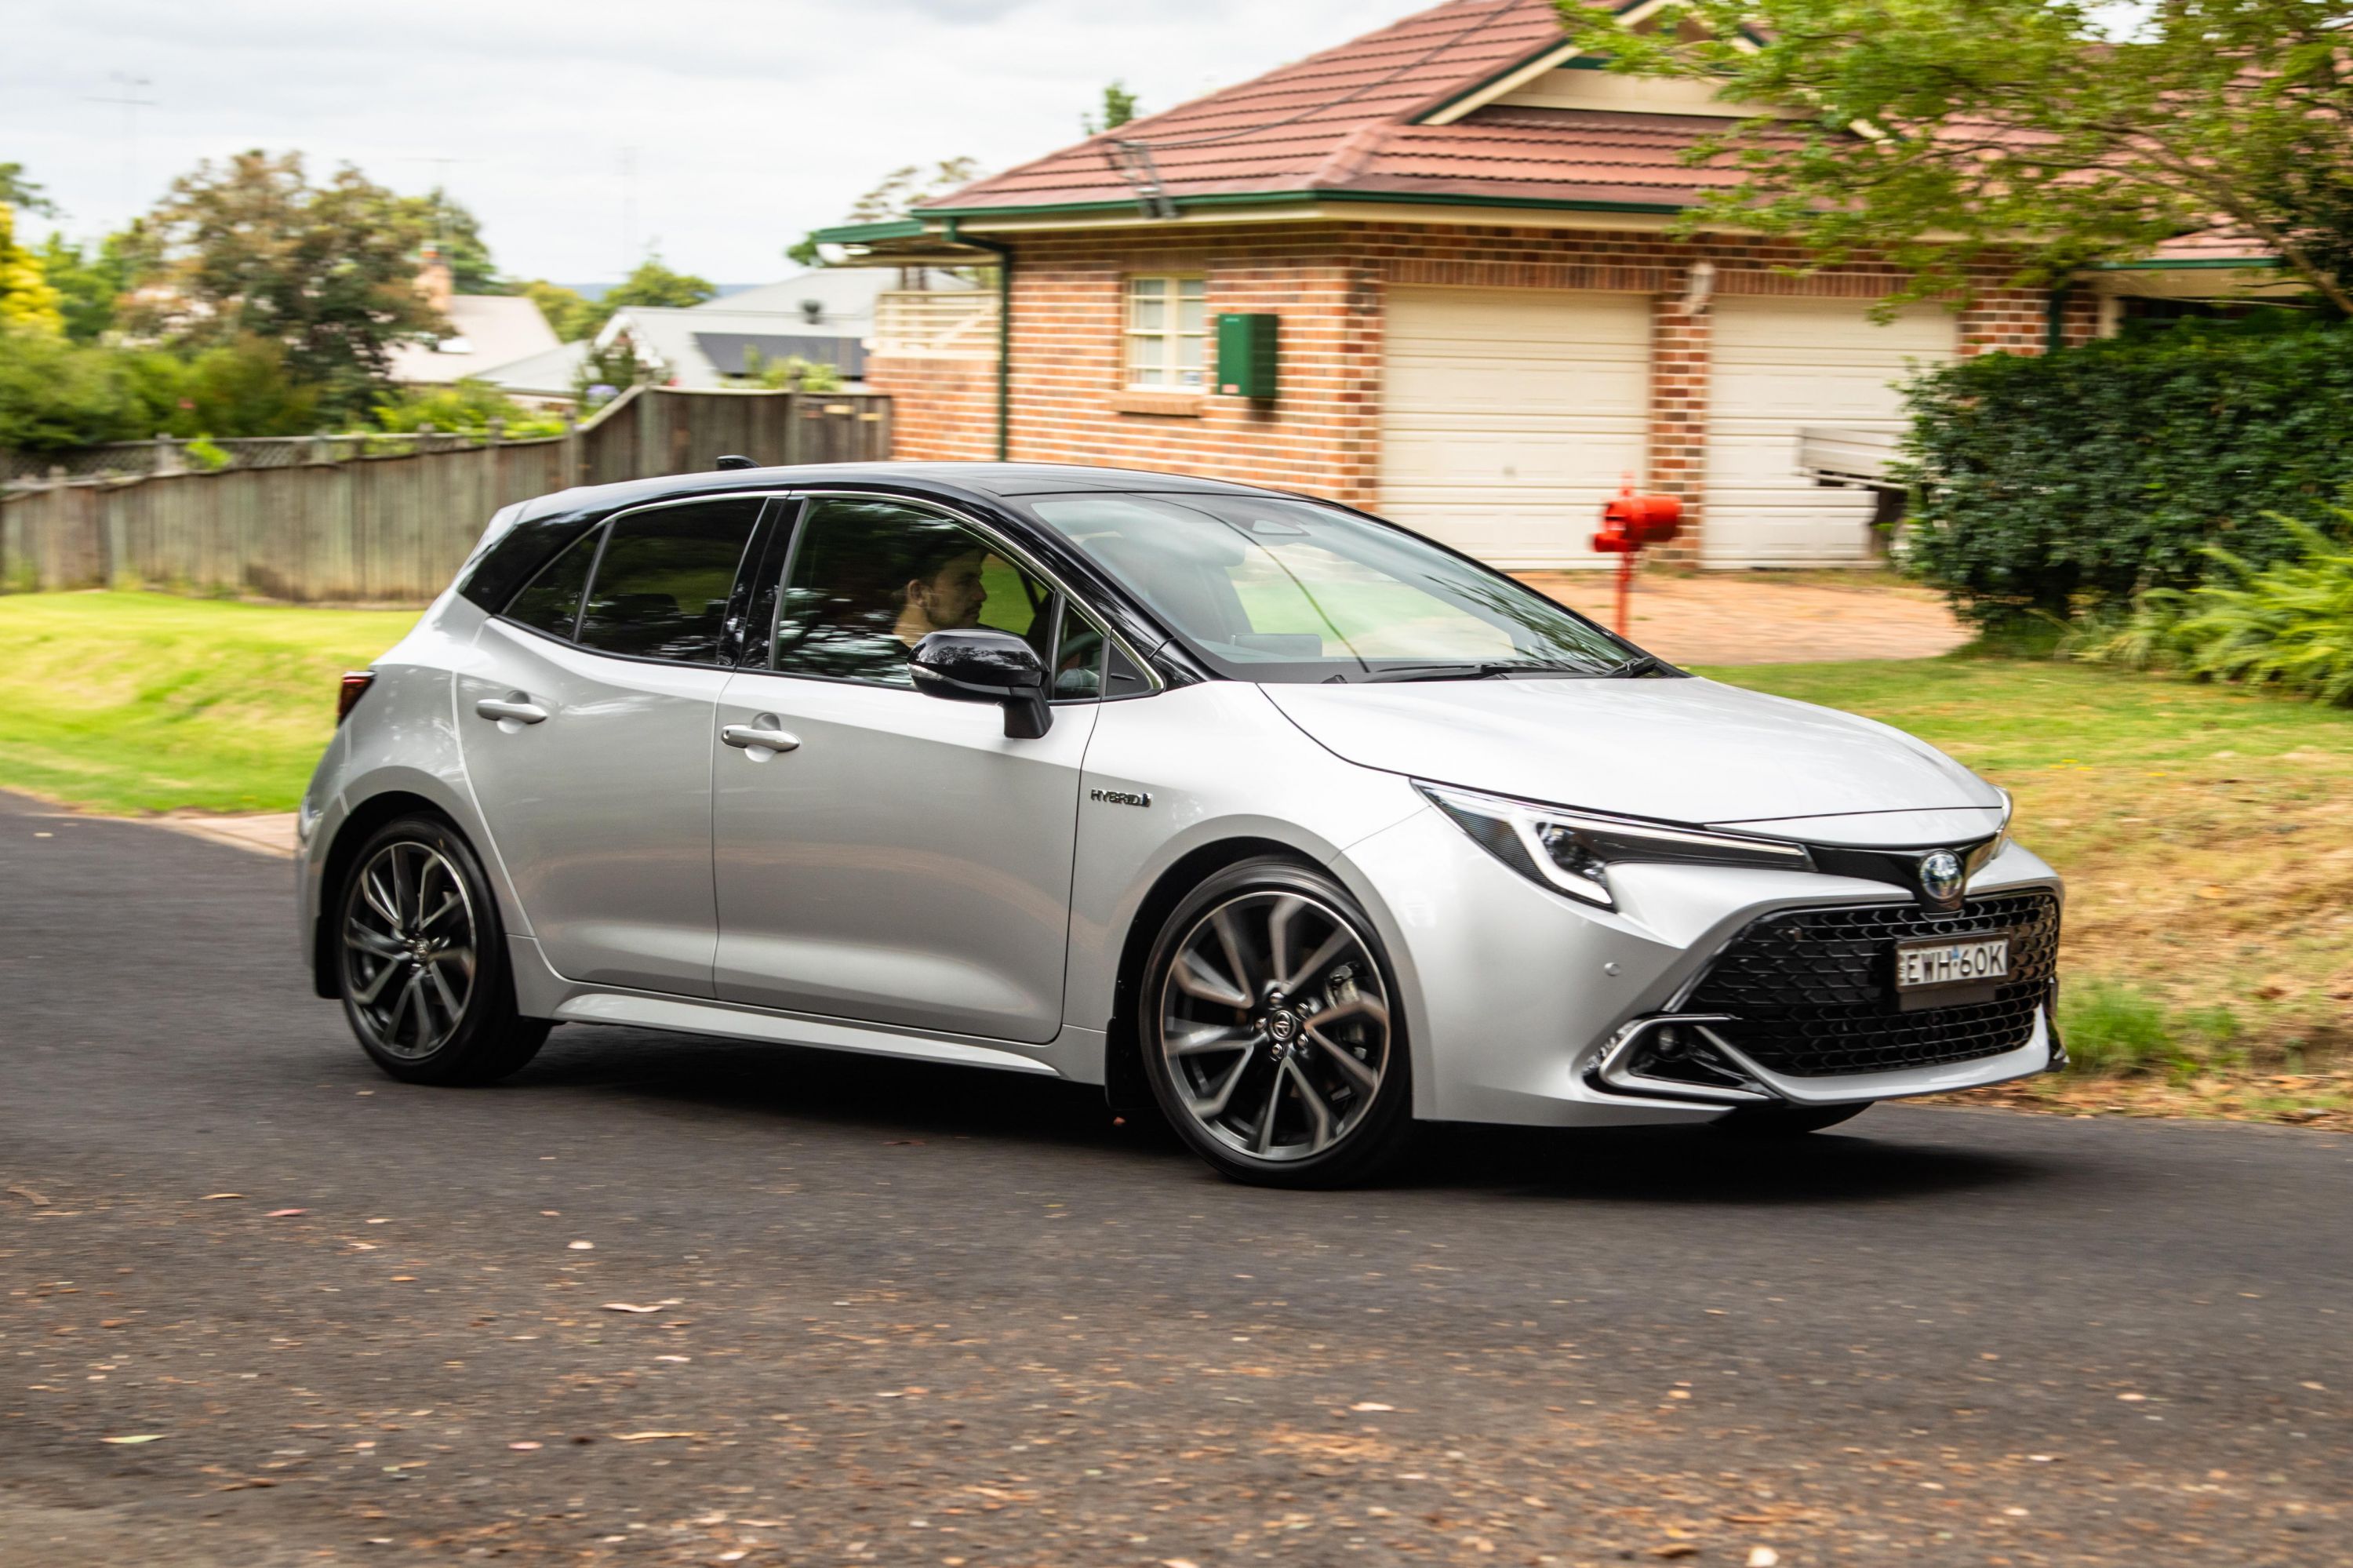 Toyota Australia increases price of most models